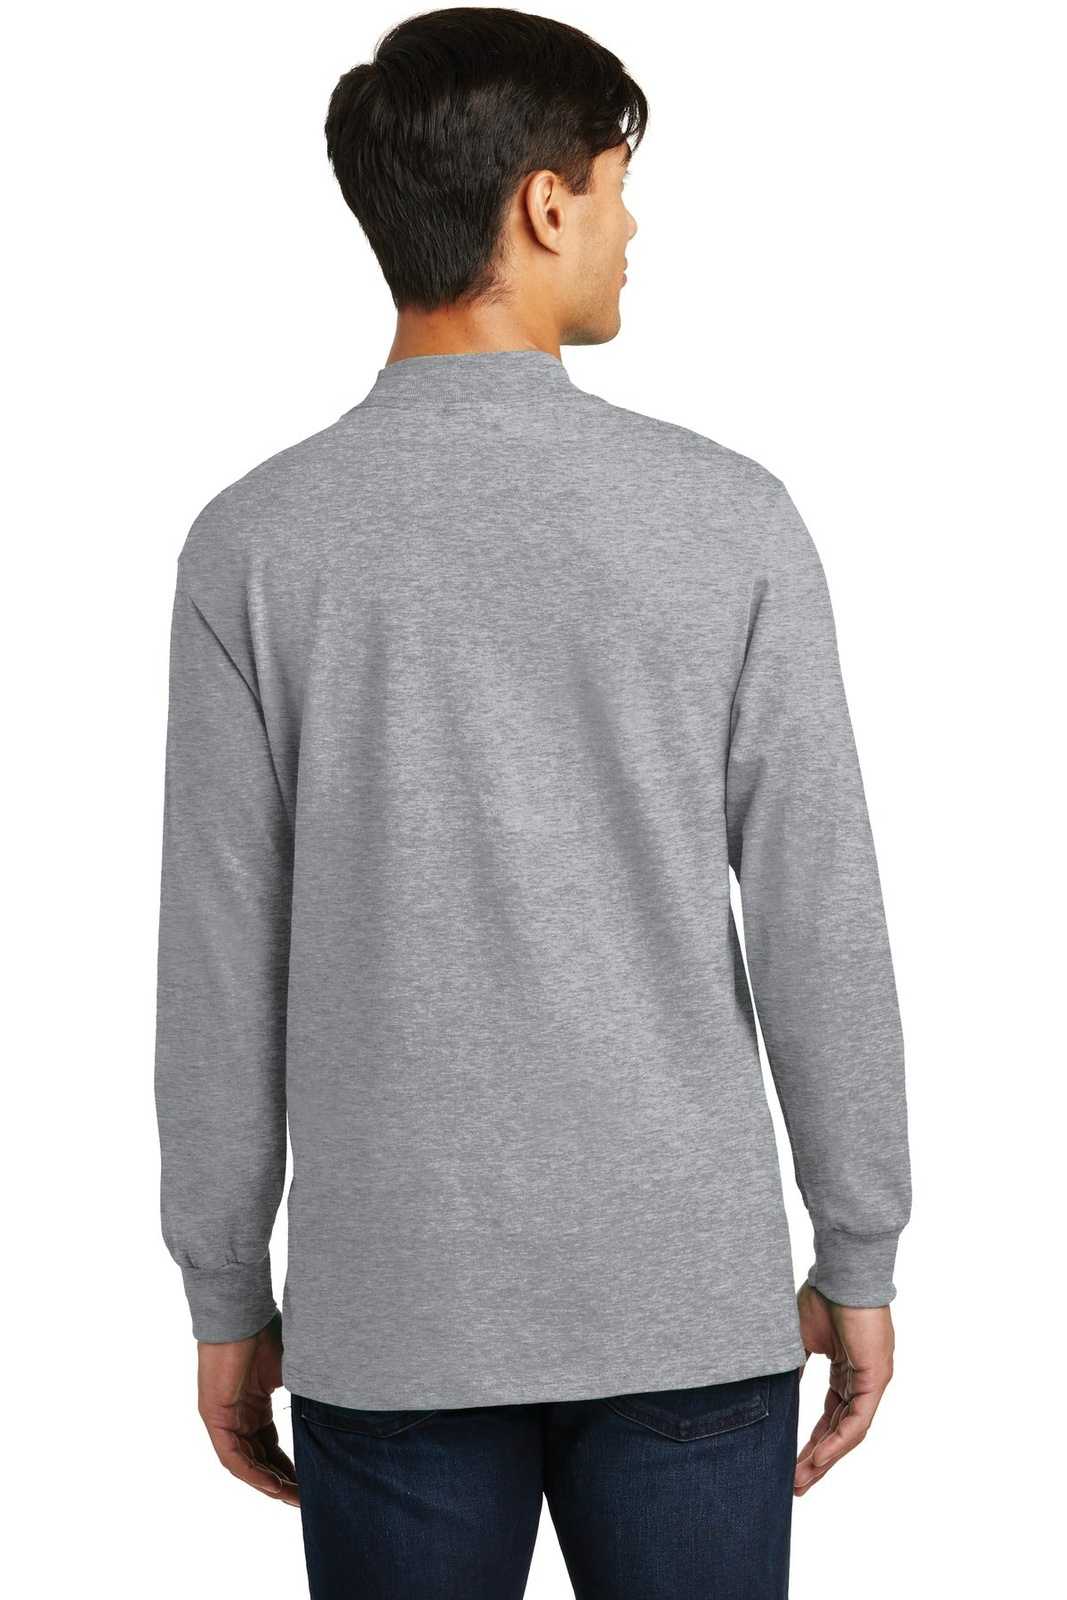 Port & Company PC61M Essential Mock Turtleneck - Athletic Heather - HIT a Double - 1